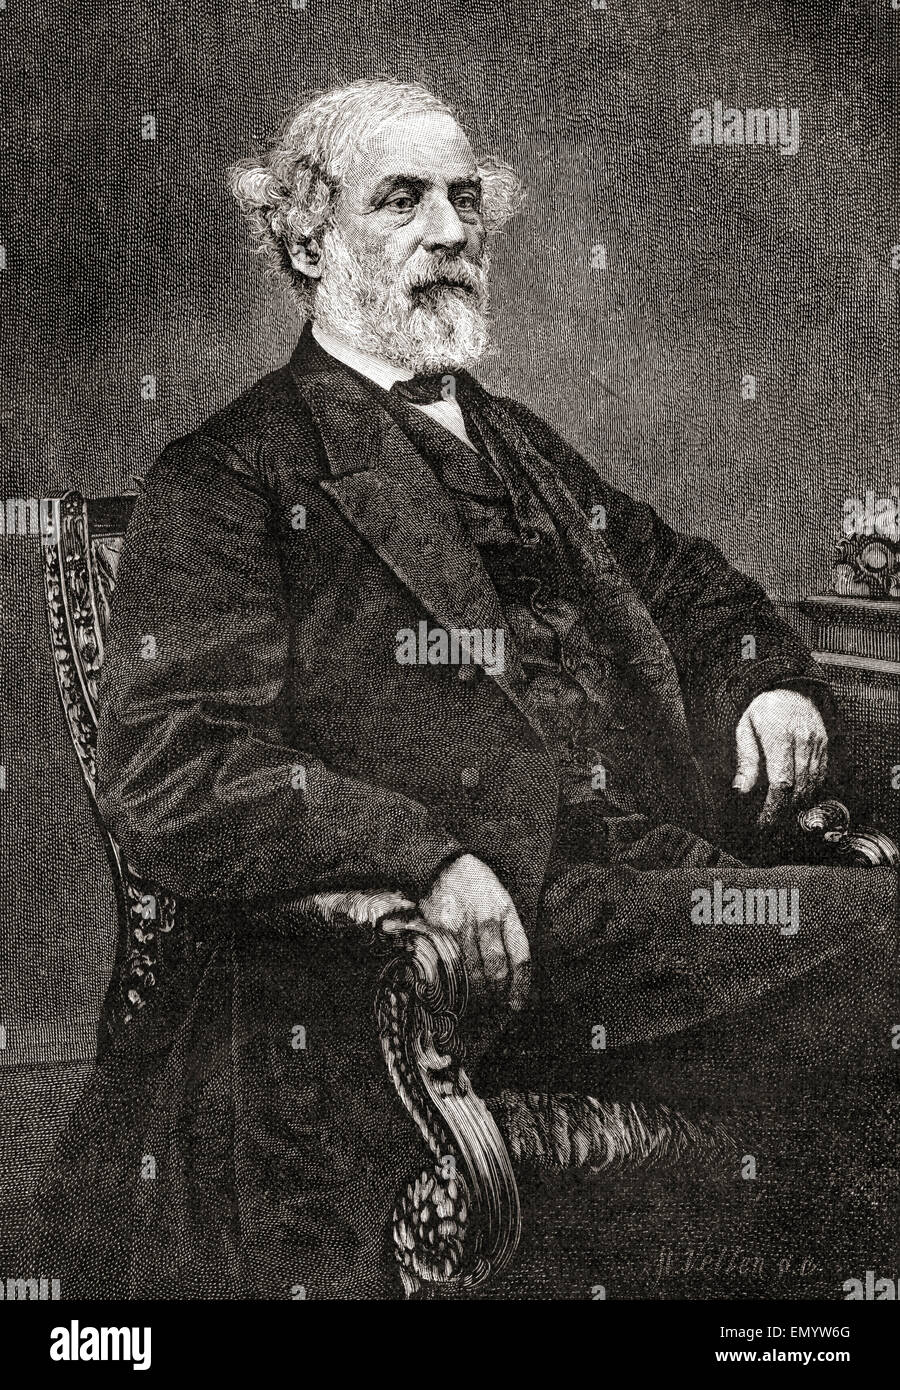 Robert Edward Lee, 1807 – 1870.   American soldier, commander of the Confederate Army of Northern Virginia in the American Civil War. Stock Photo